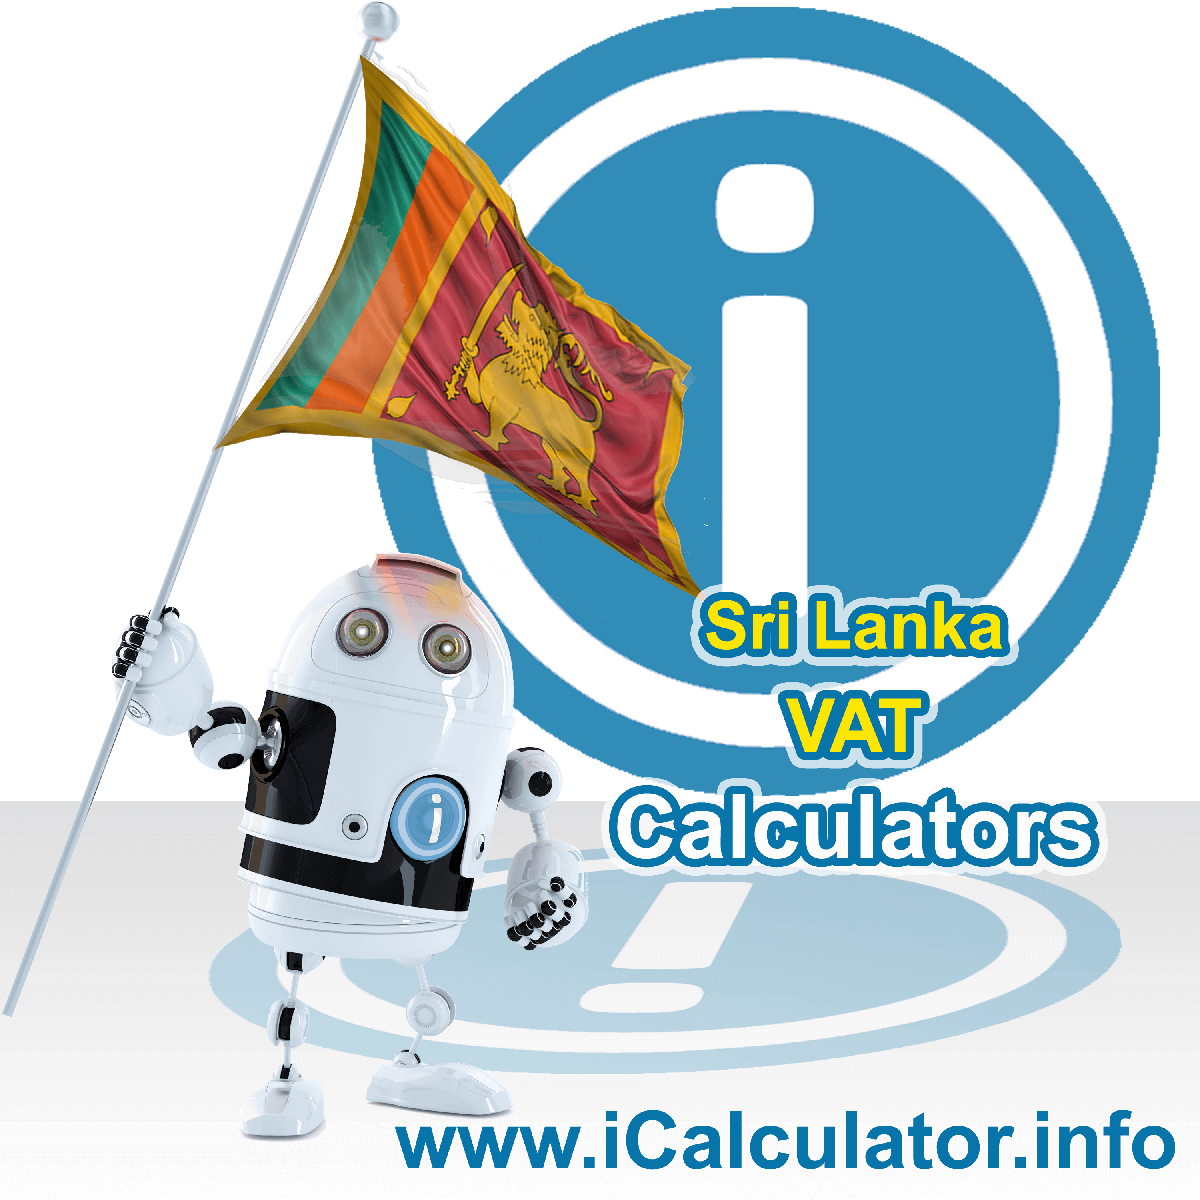 Sri Lanka VAT Calculator. This image shows the Sri Lanka flag and information relating to the VAT formula used for calculating Value Added Tax in Sri Lanka using the Sri Lanka VAT Calculator in 2023